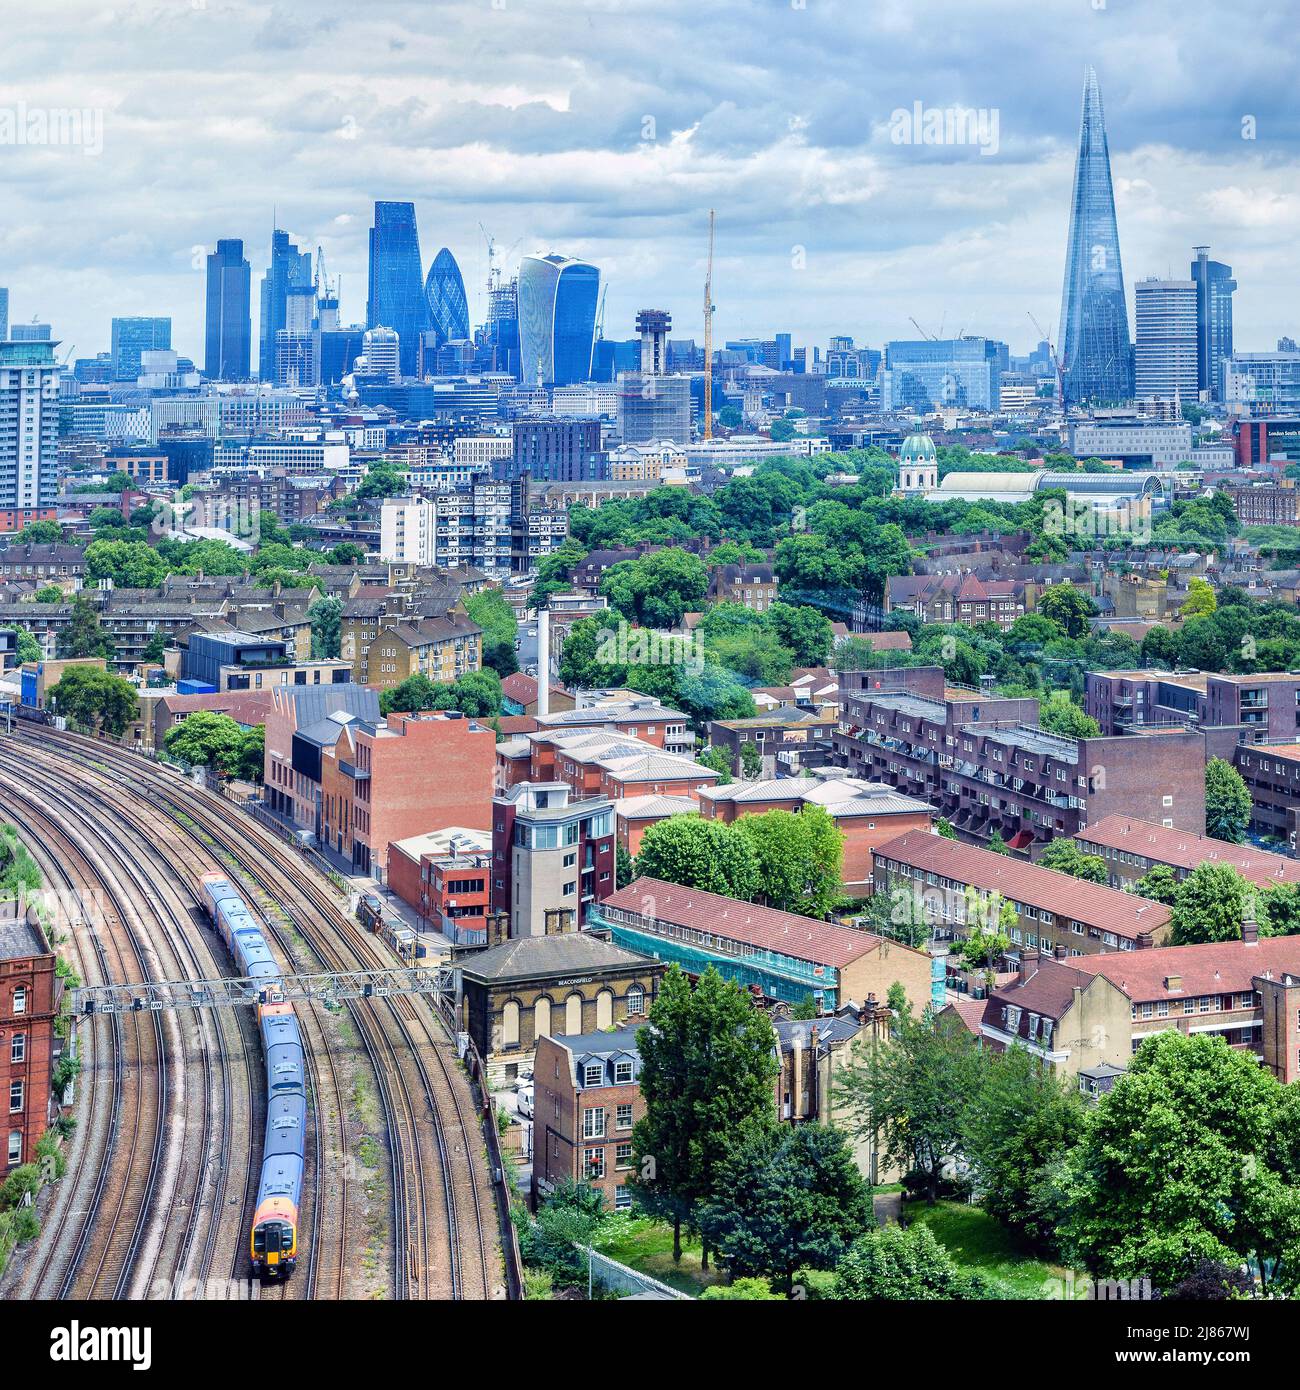 Aerial of famous London buildings and transport Stock Photo